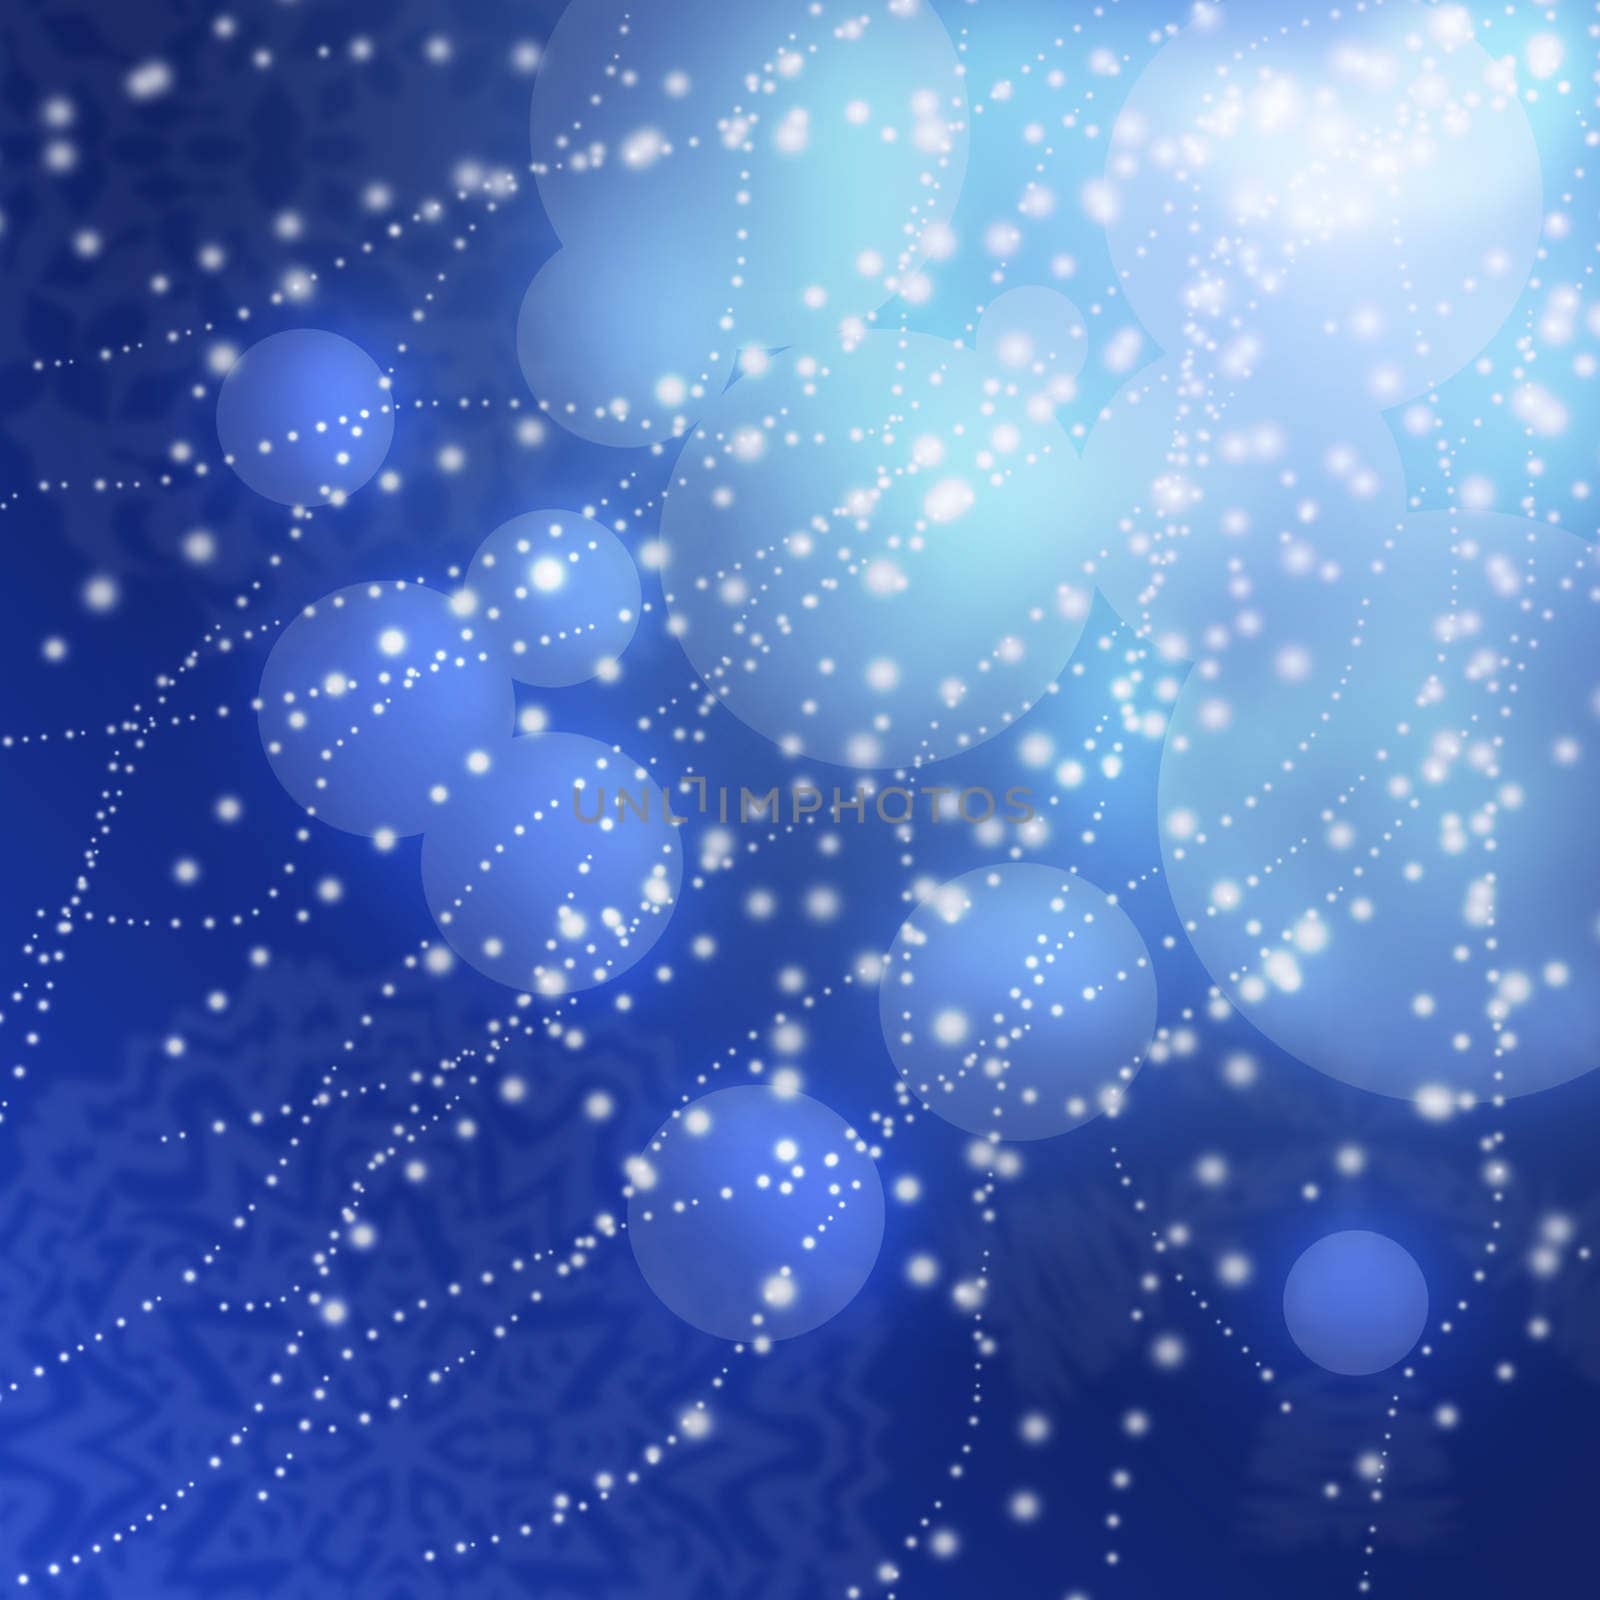 Abstract blue background with snowflakes by cherezoff